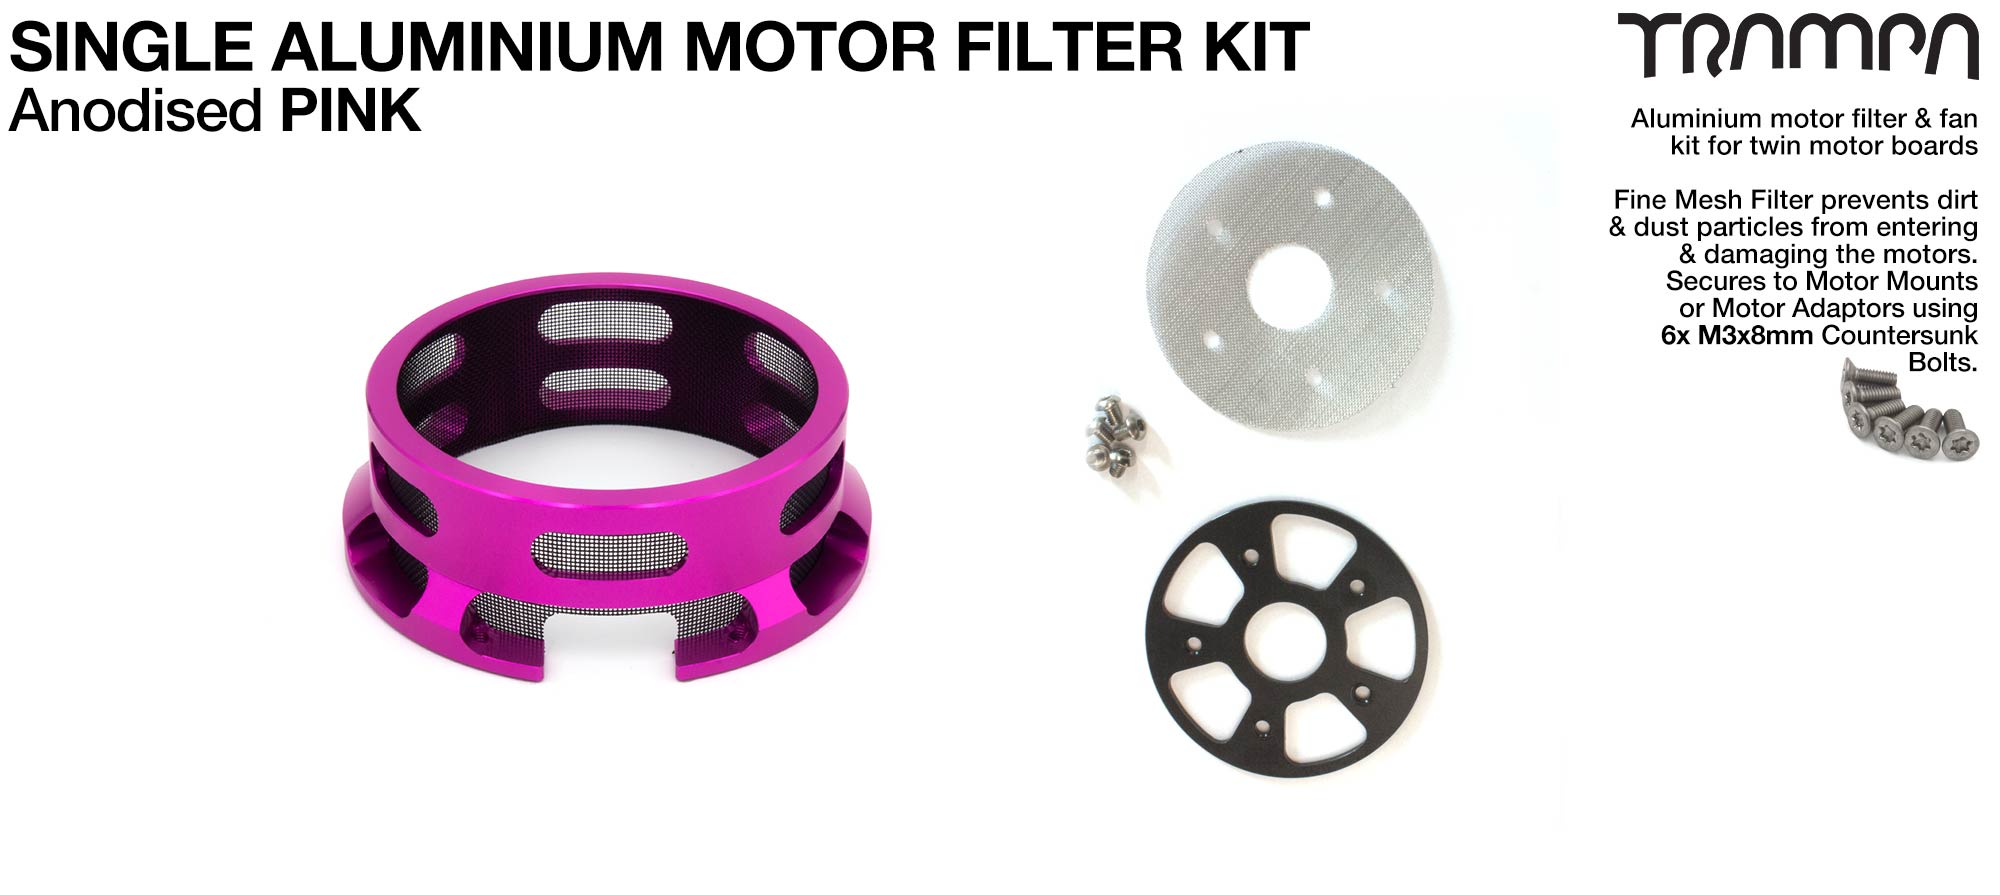 HALF CAGE Motor protection  - PINK anodised with Filters - SINGLE